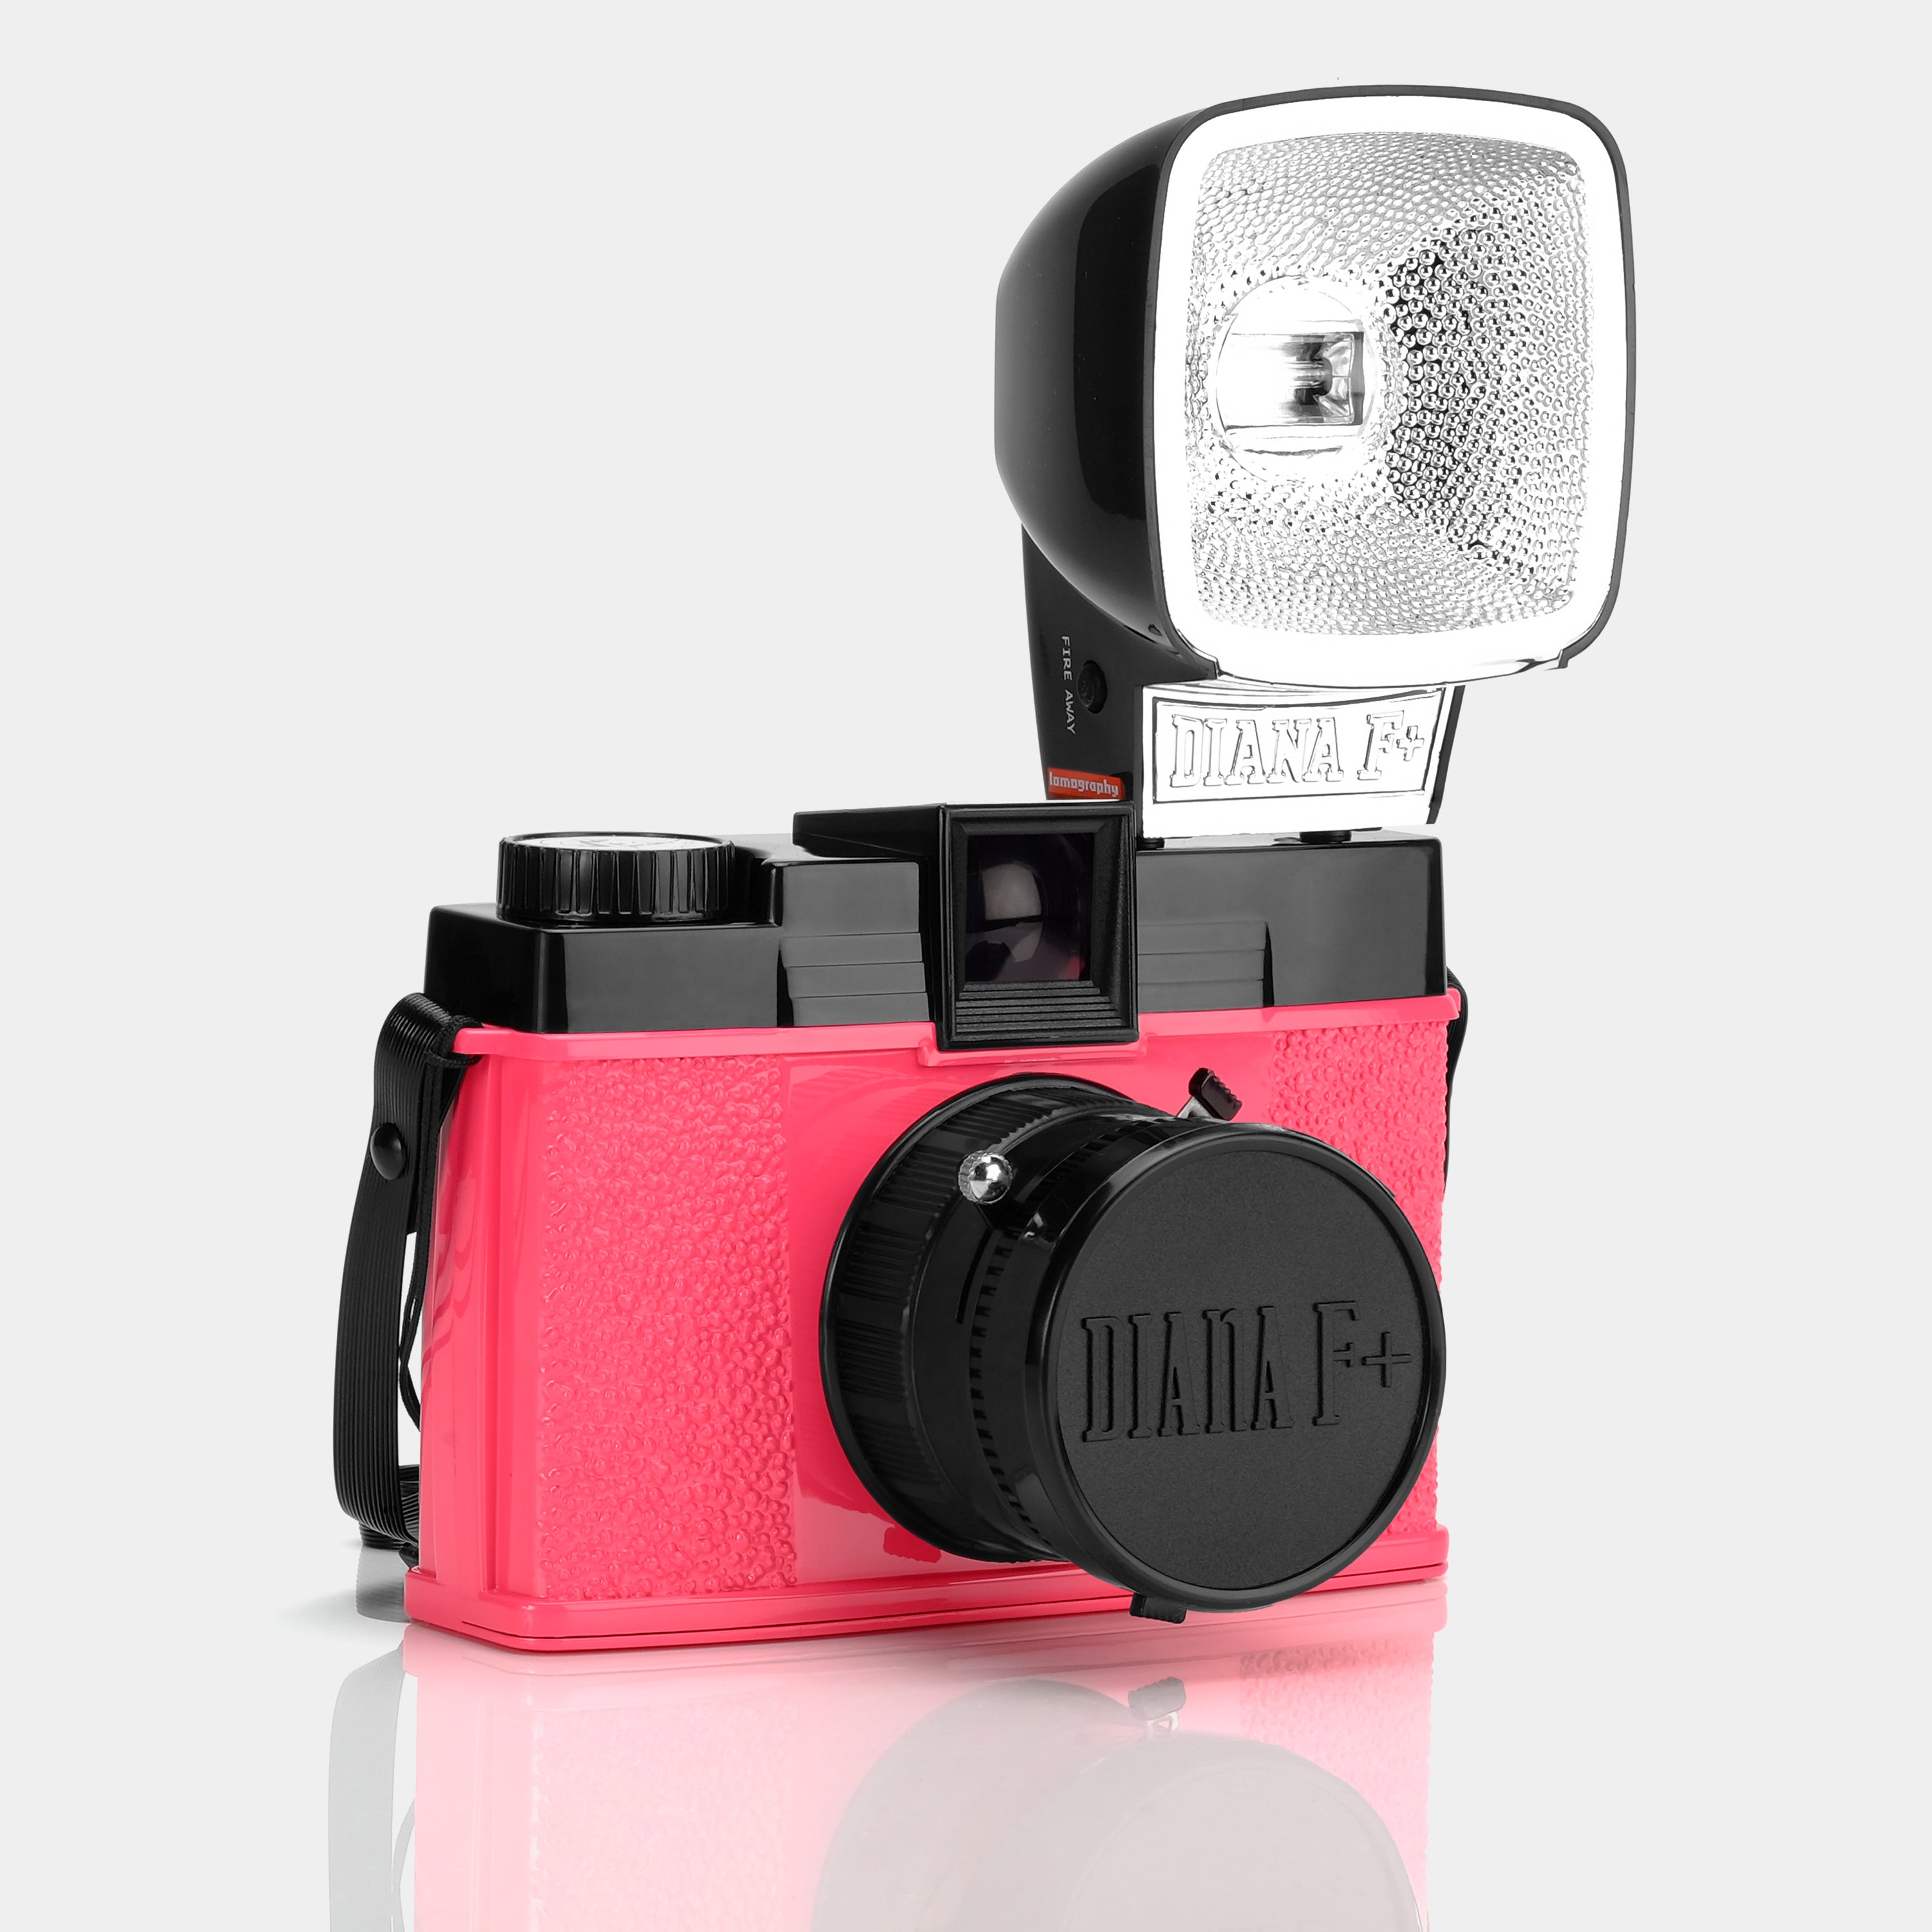 Diana F+ (Mr. Pink Edition) 120 Film Camera with Flash